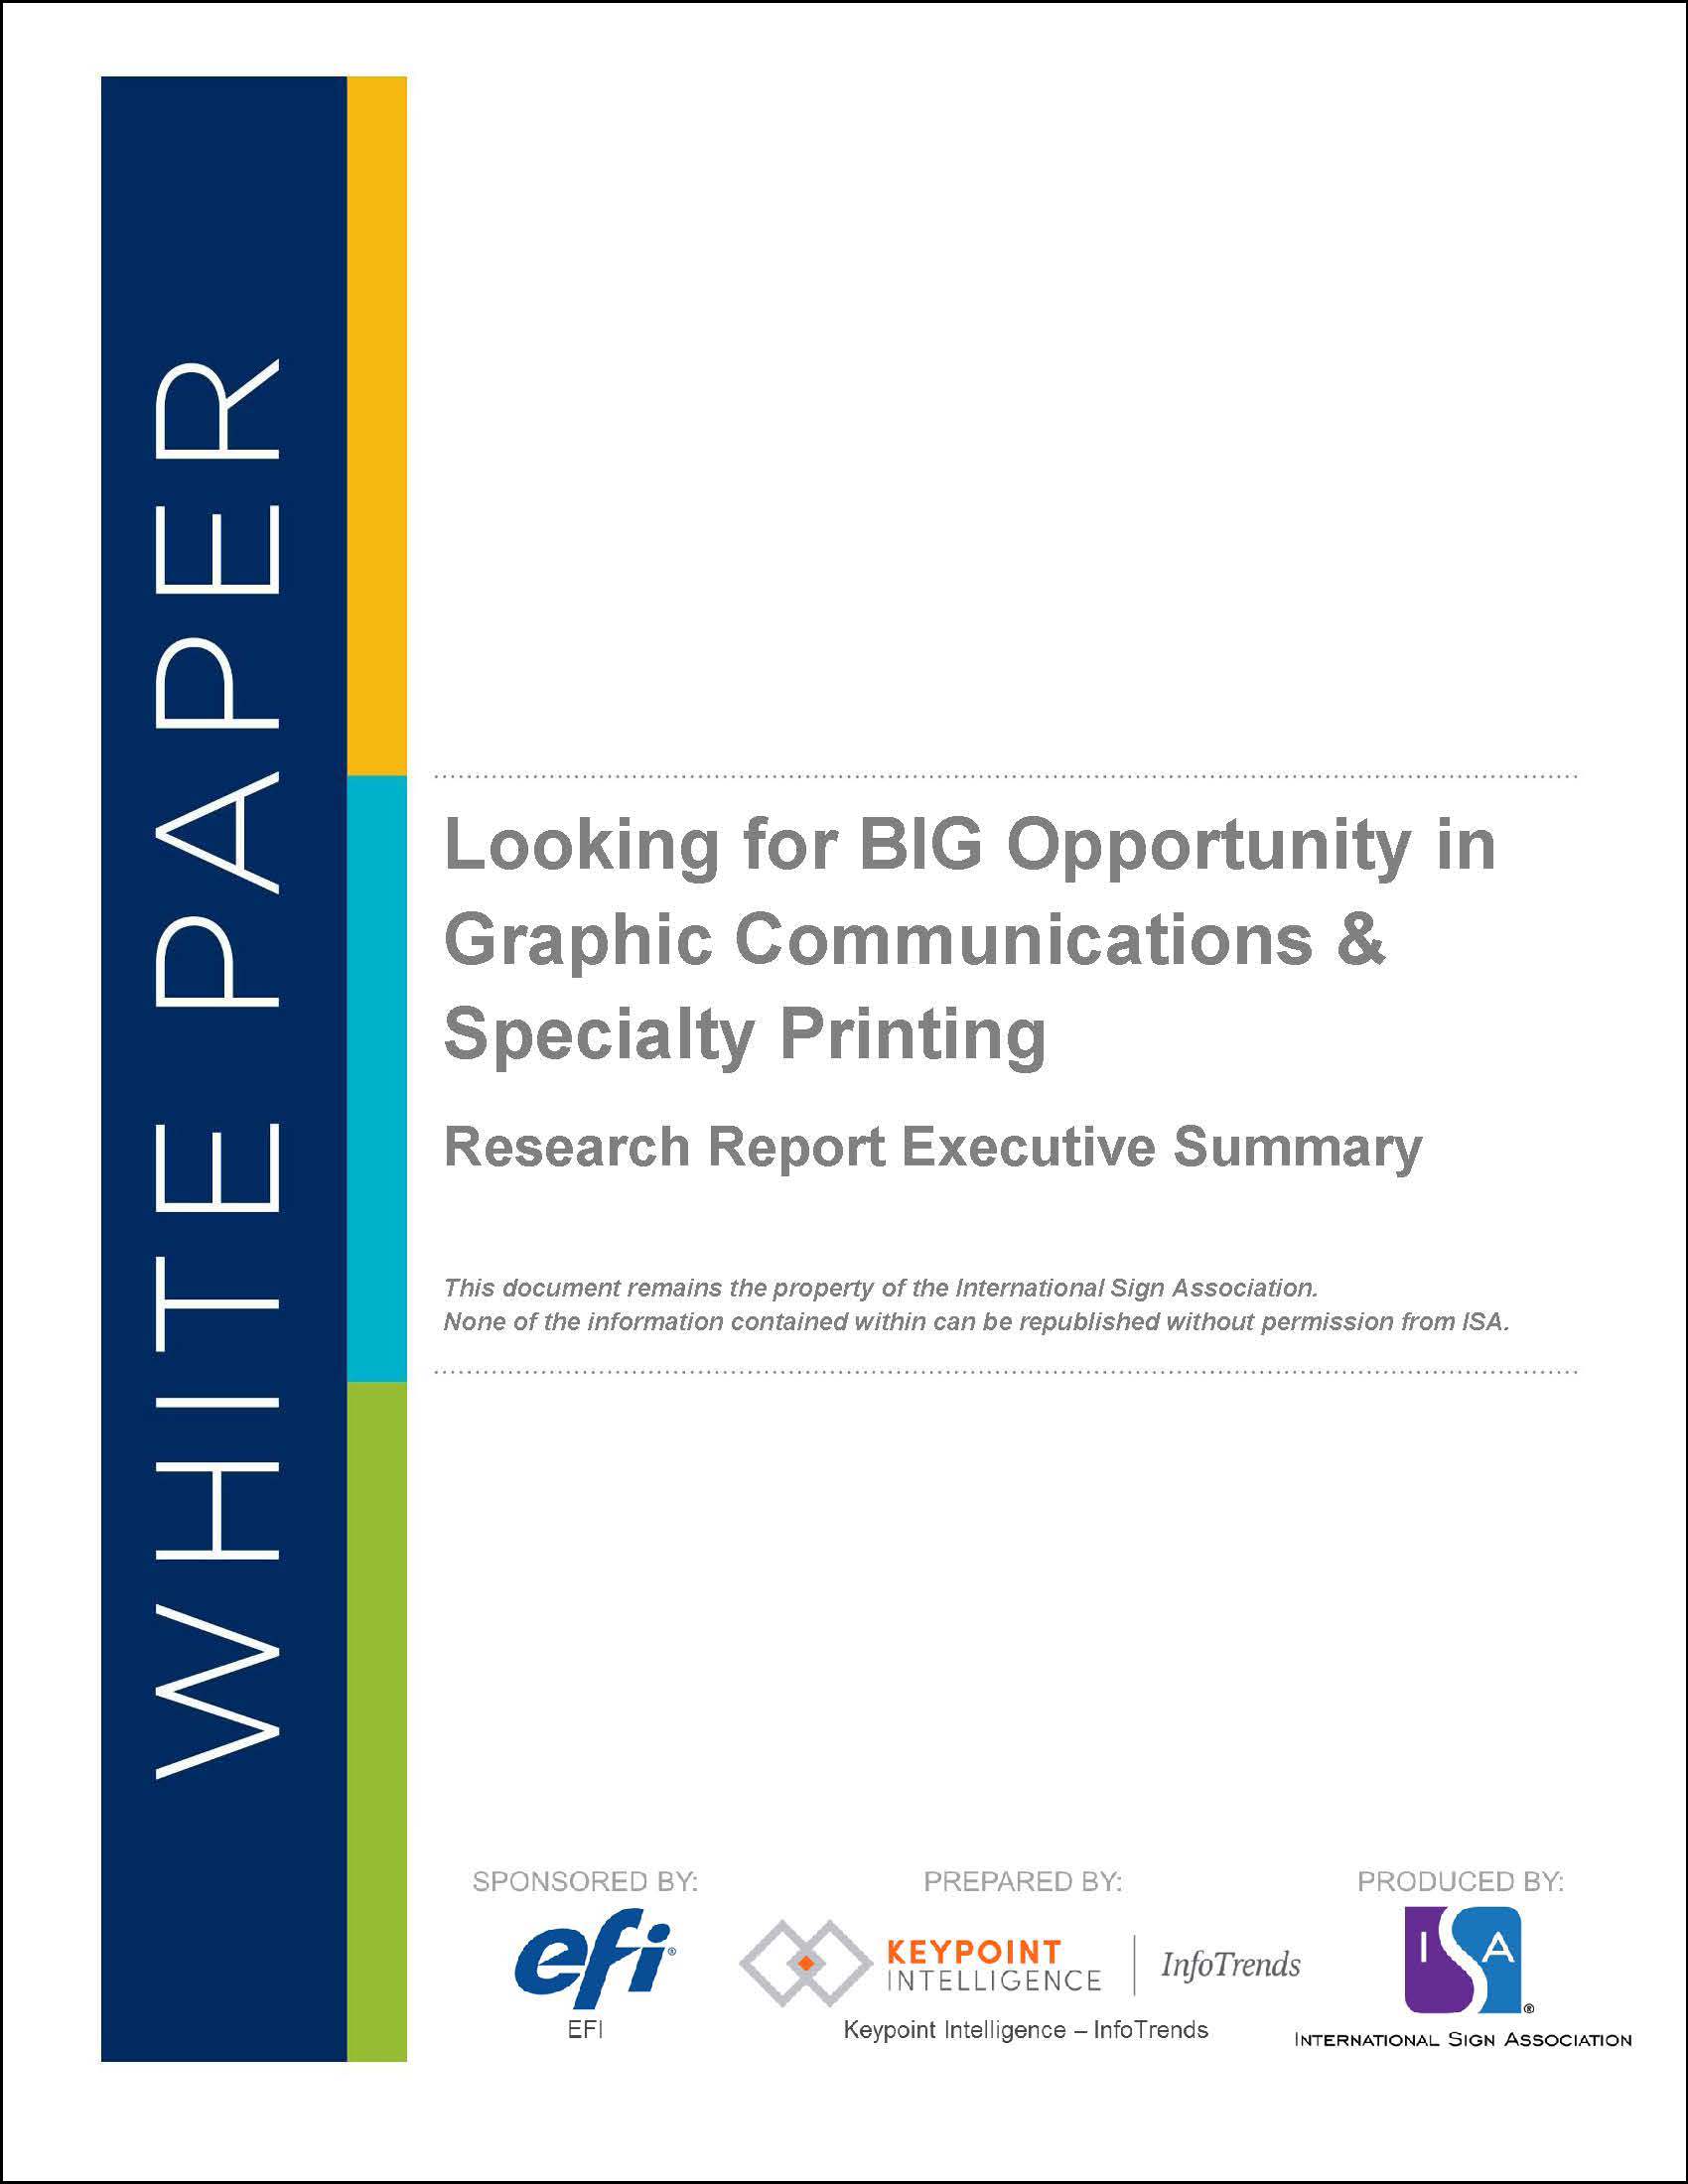 Looking for BIG Opportunity in Graphic Communications & Specialty Printing